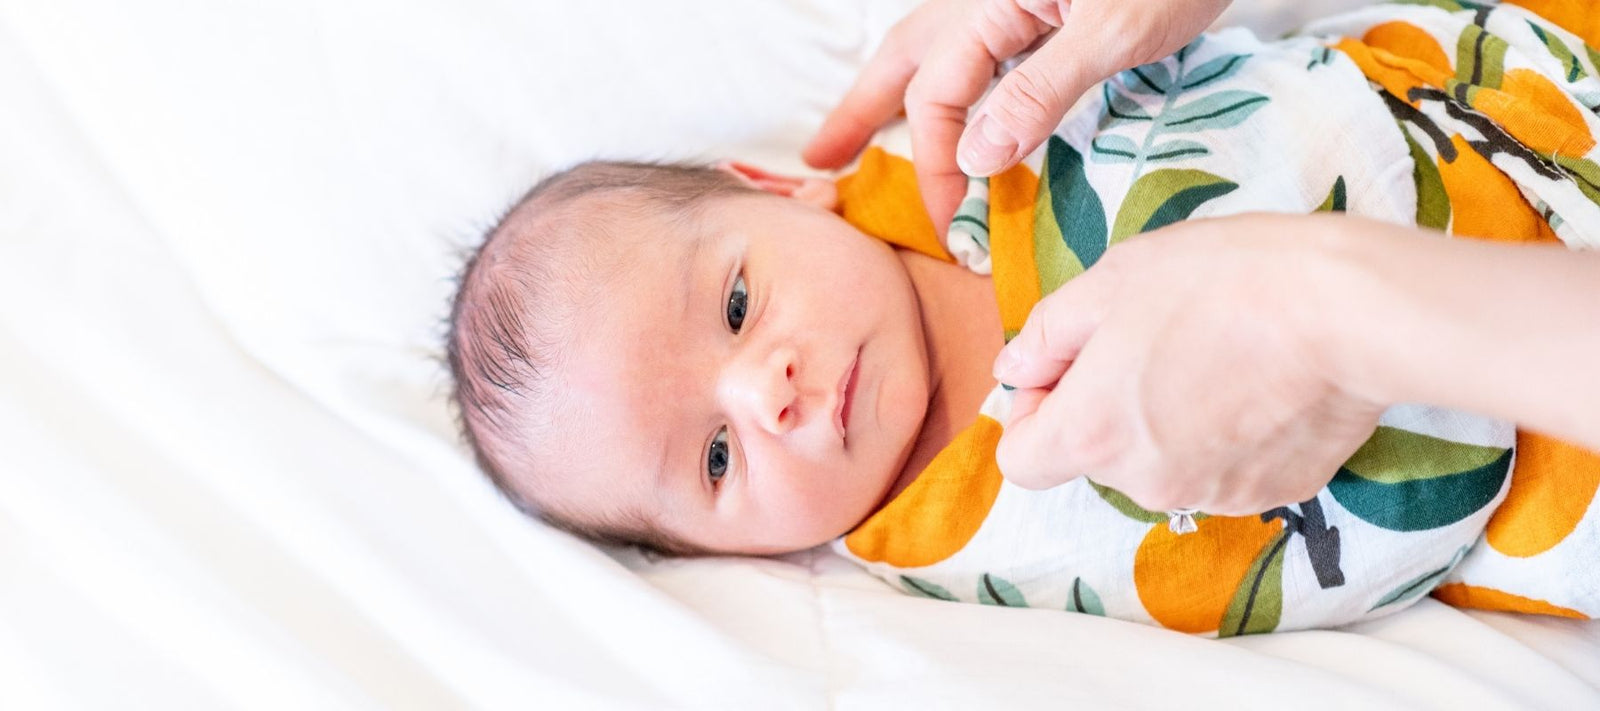 Baby Swaddles; How, Why, Safety, Benefits & Risks. Baby Swaddling and Baby Sleep